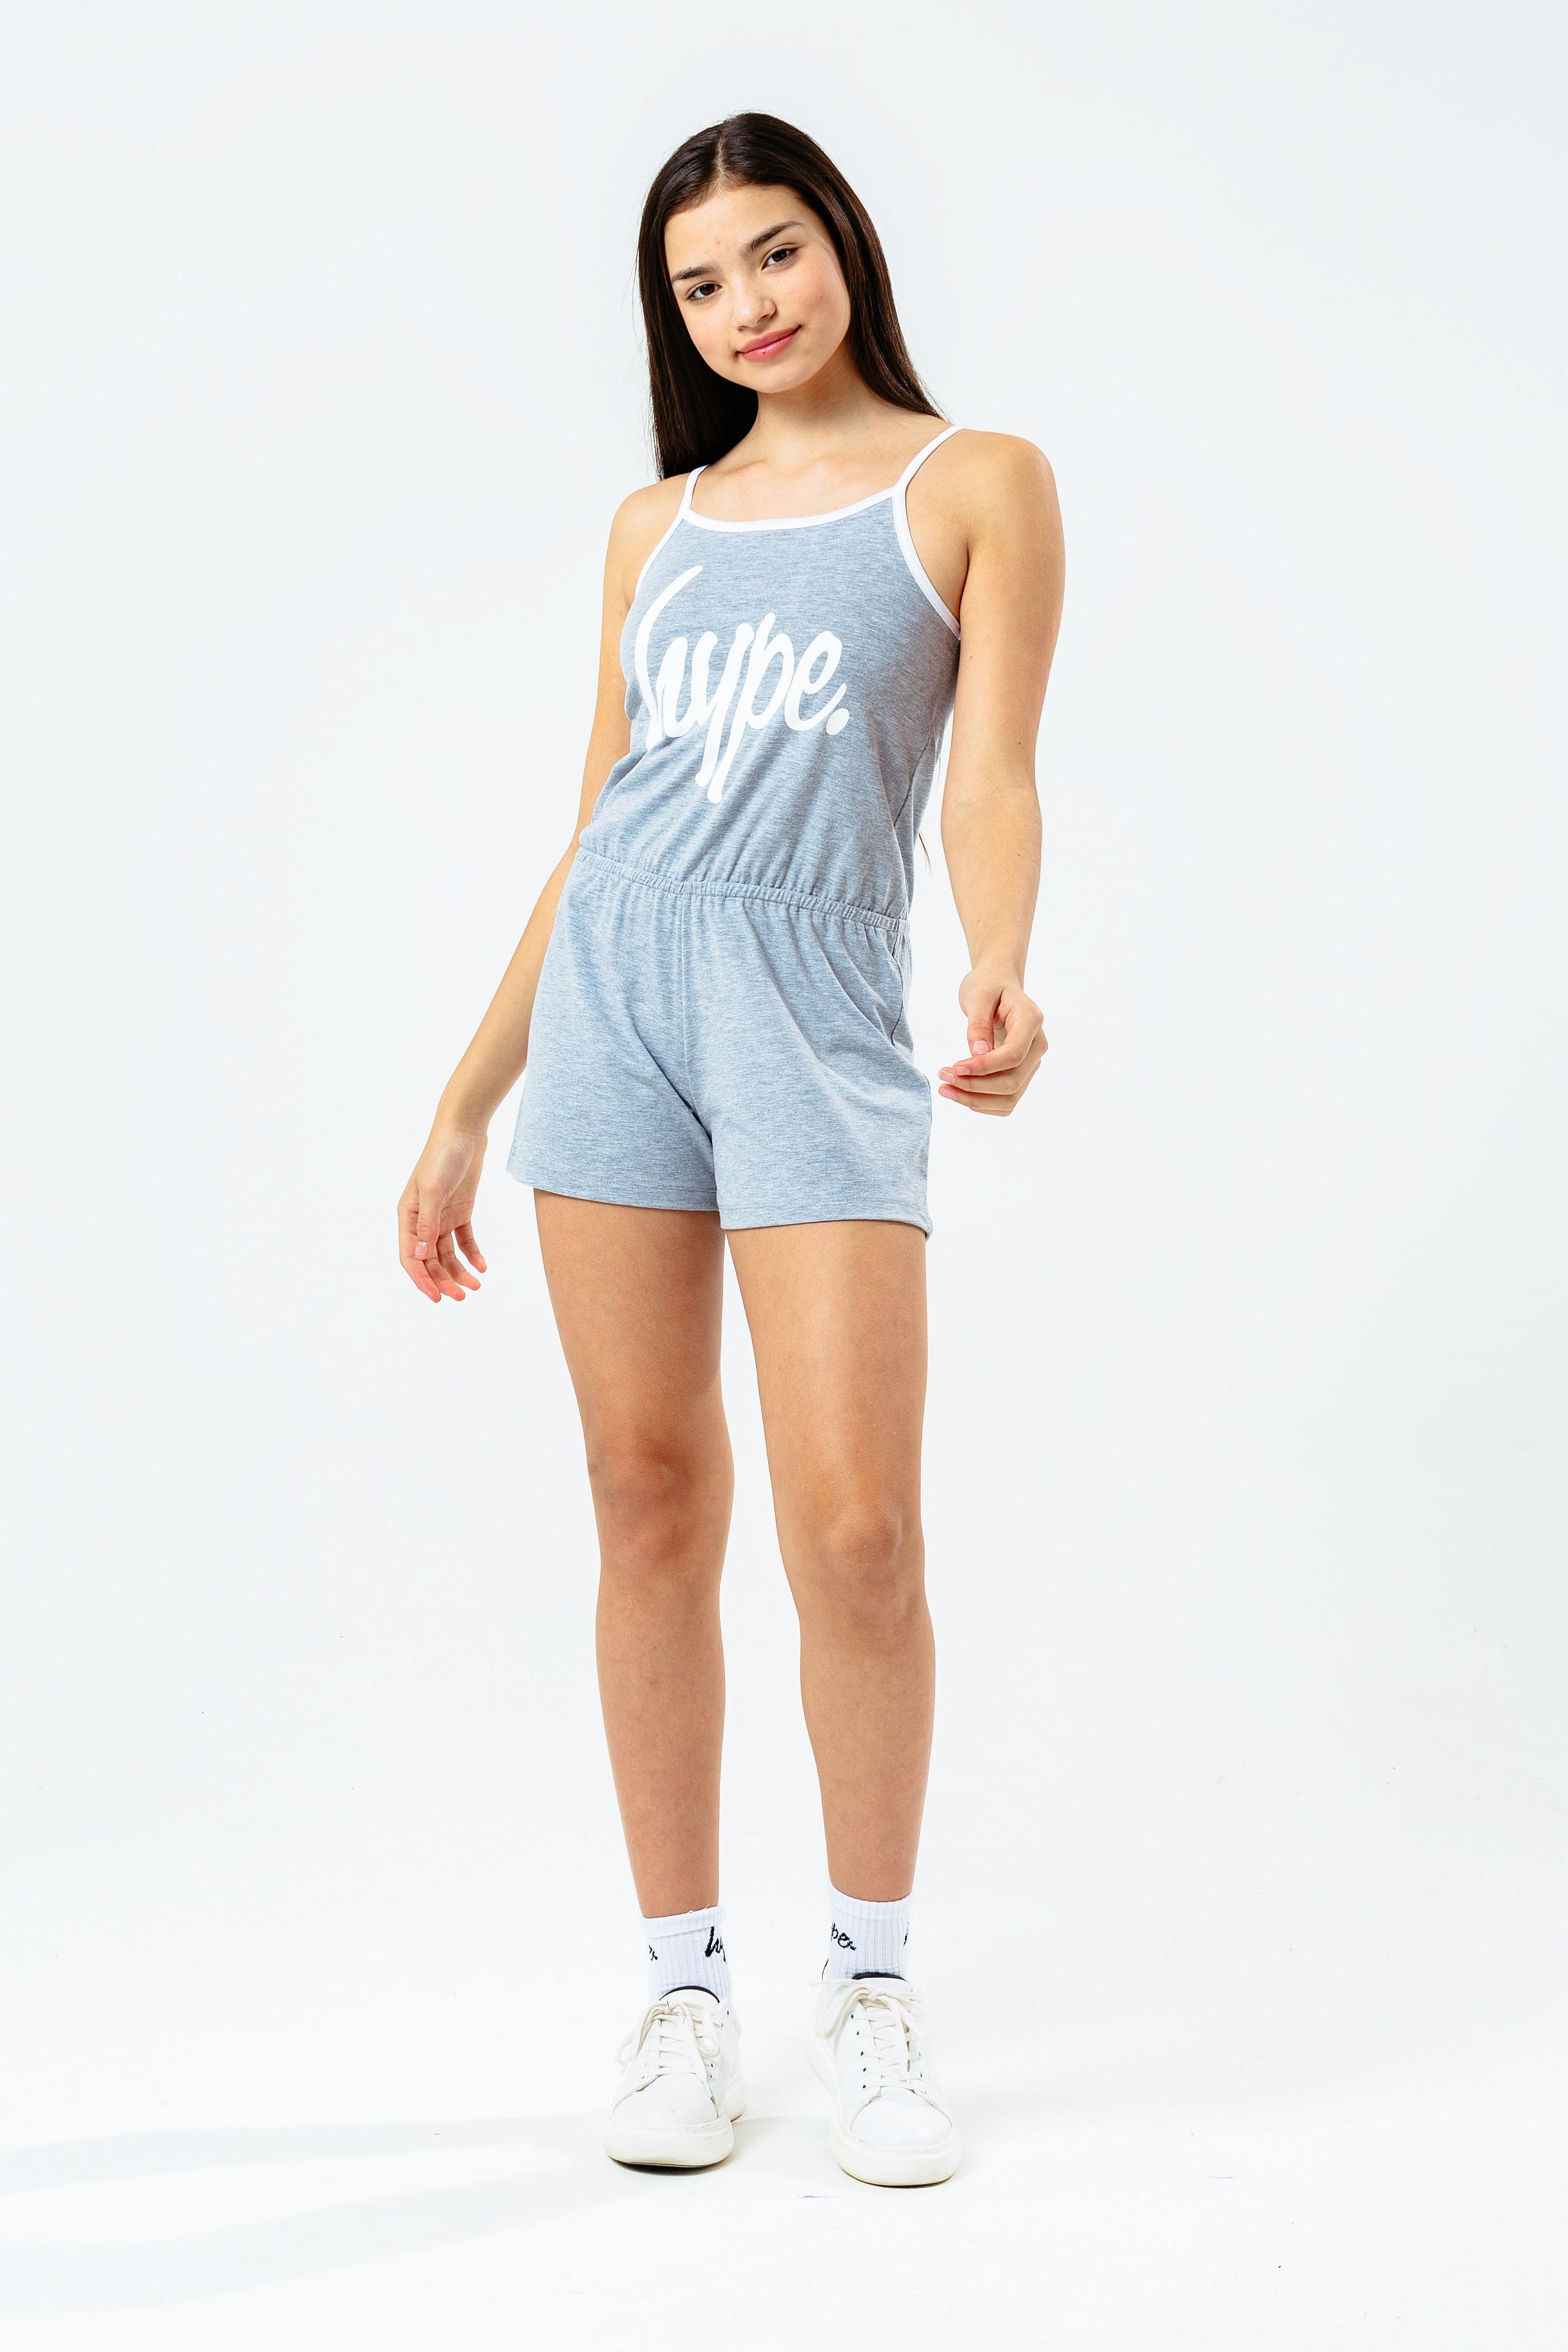 Alternate View 1 of HYPE GREY MARL GIRLS STRAPPY PLAYSUIT